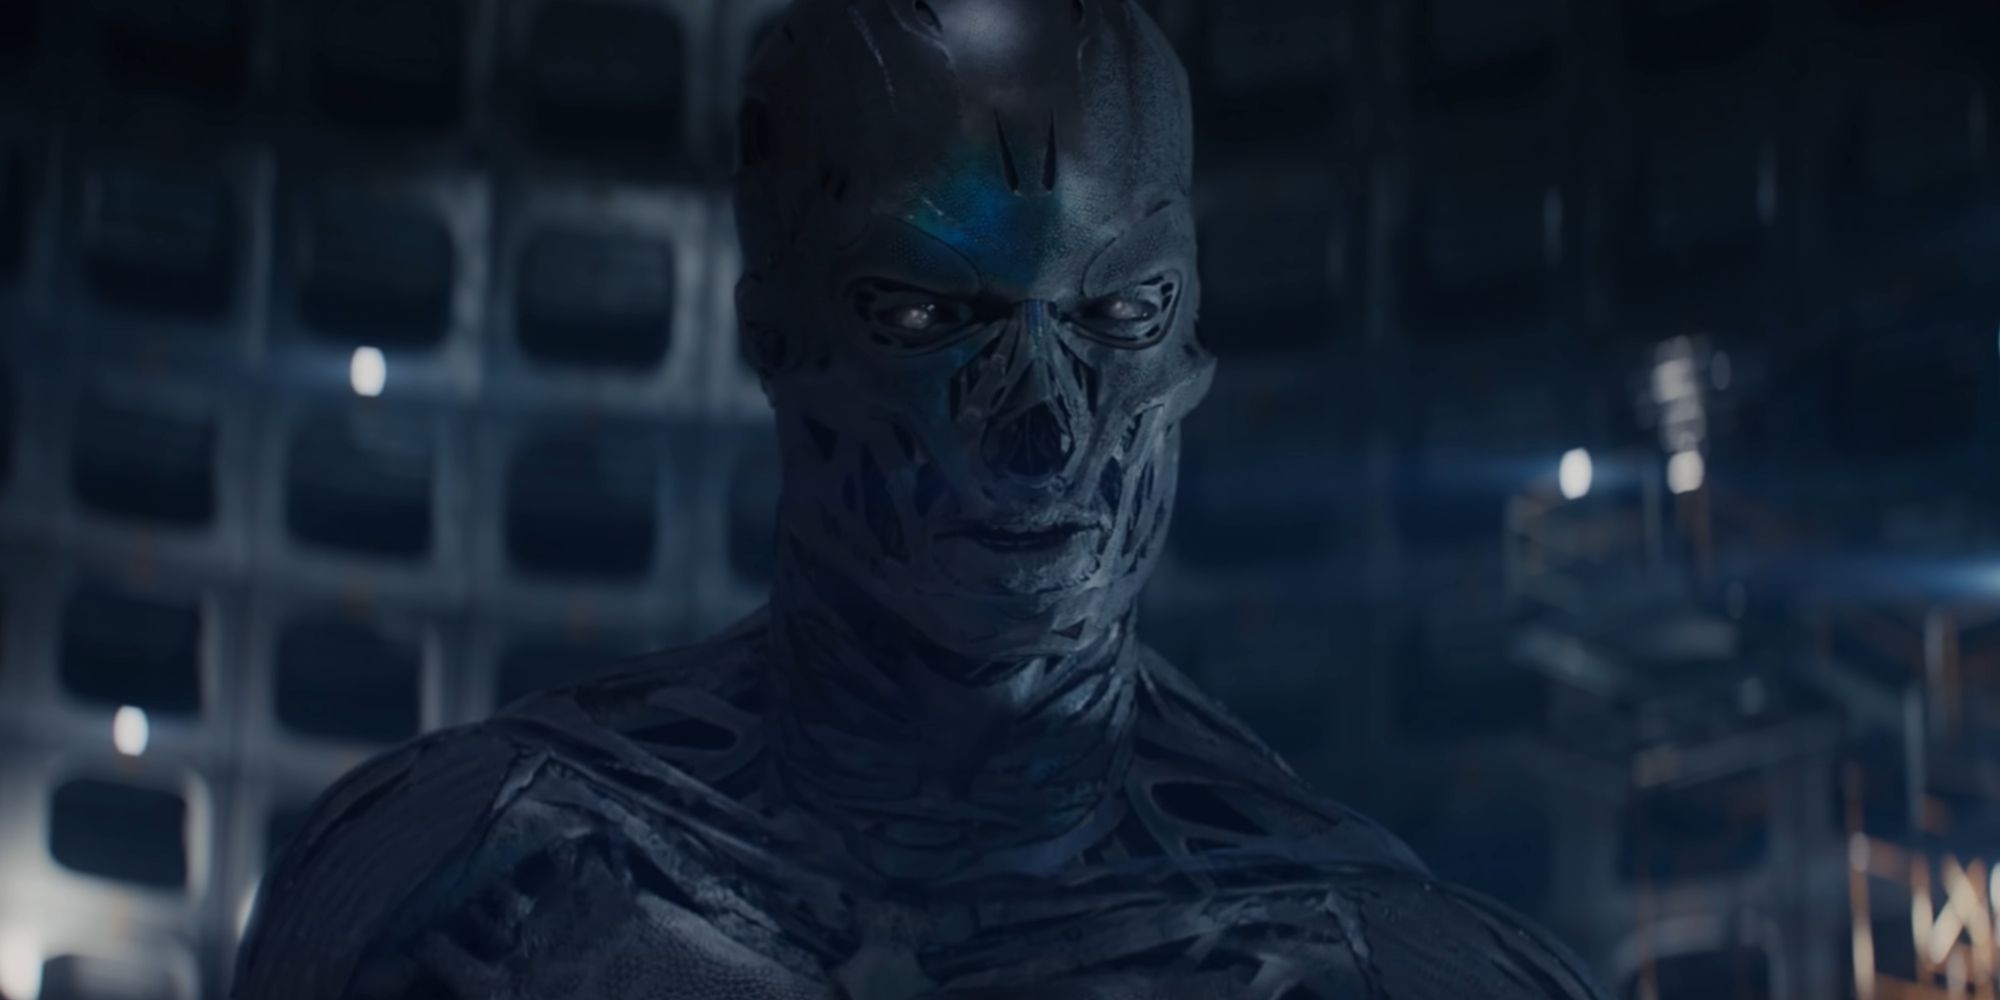 The T-3000 overpowering the T-800 in Terminator Genisys